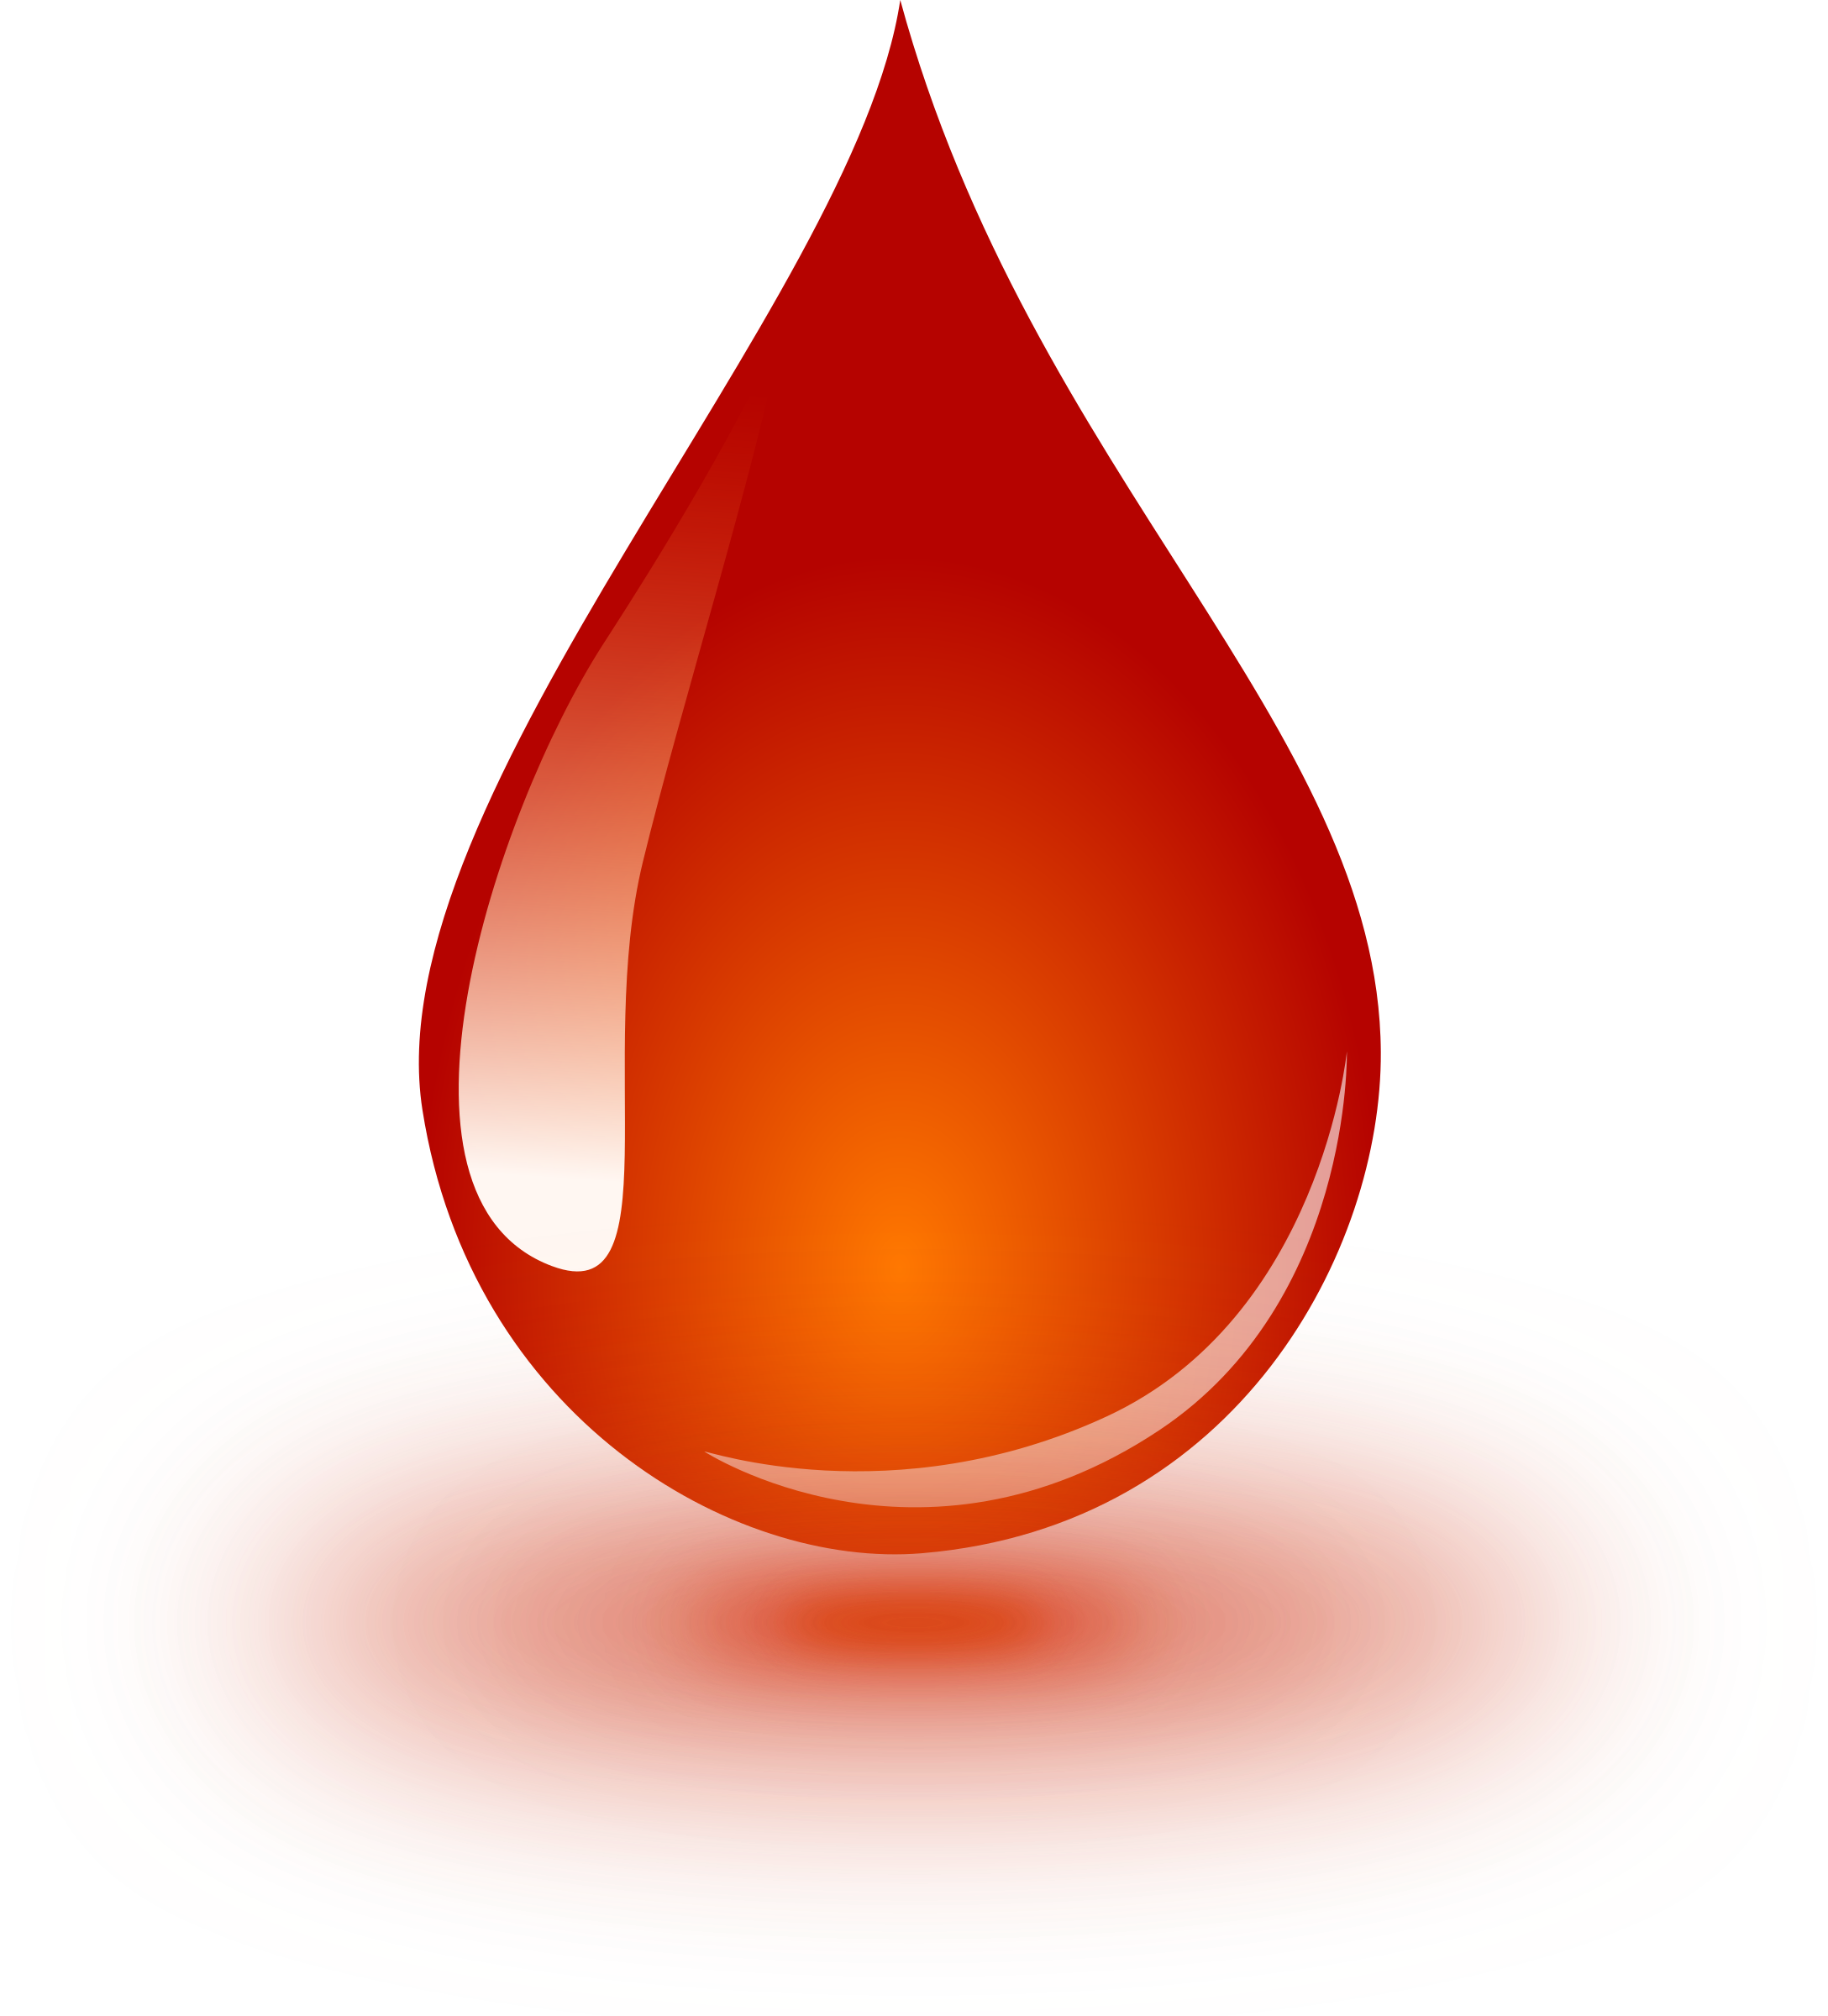 free clipart of blood drop - photo #28